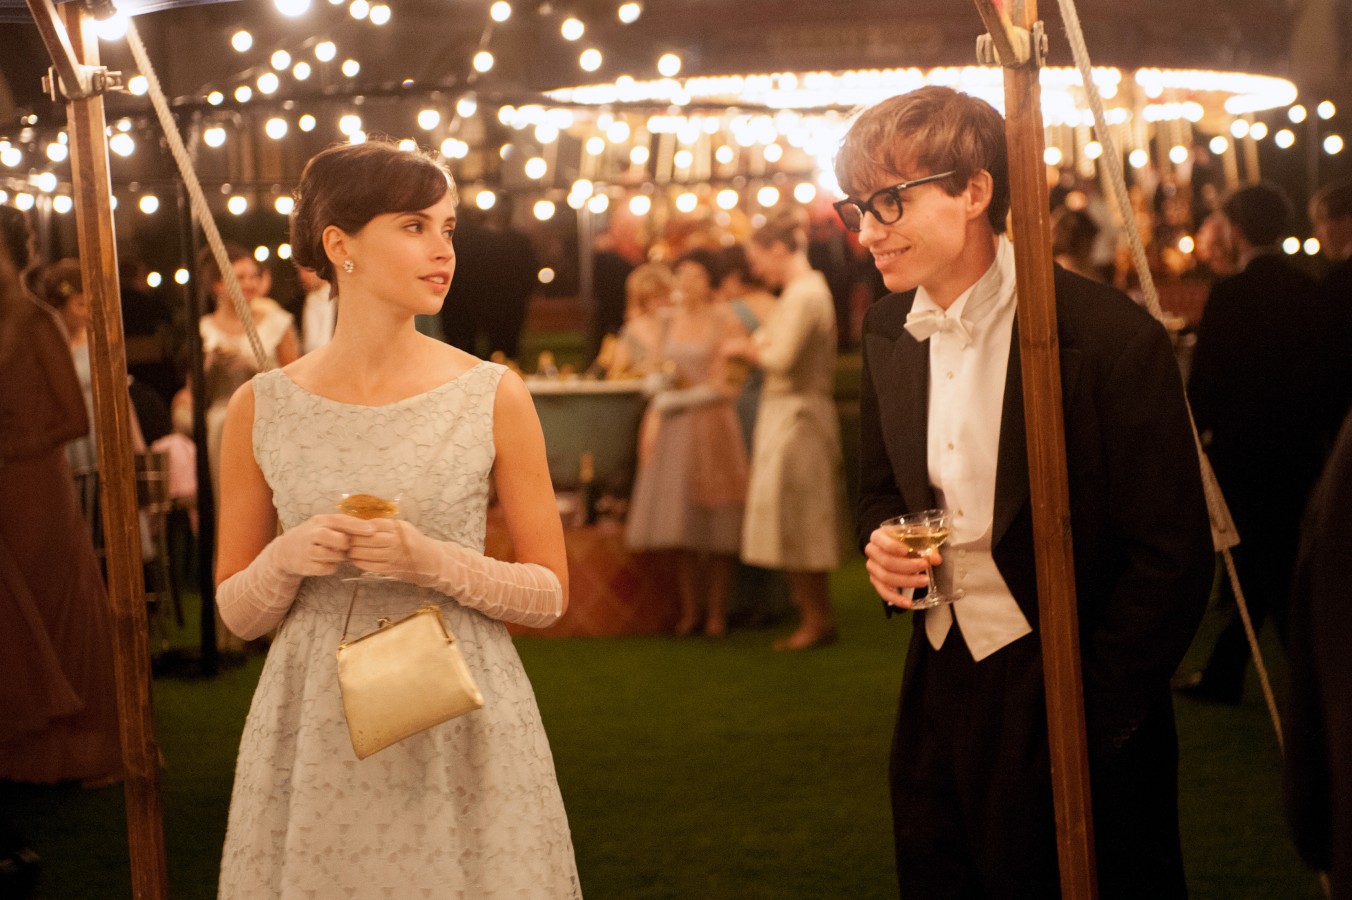 THE THEORY OF EVERYTHING Overplays Sentiment But Still Earns a Passing Grade